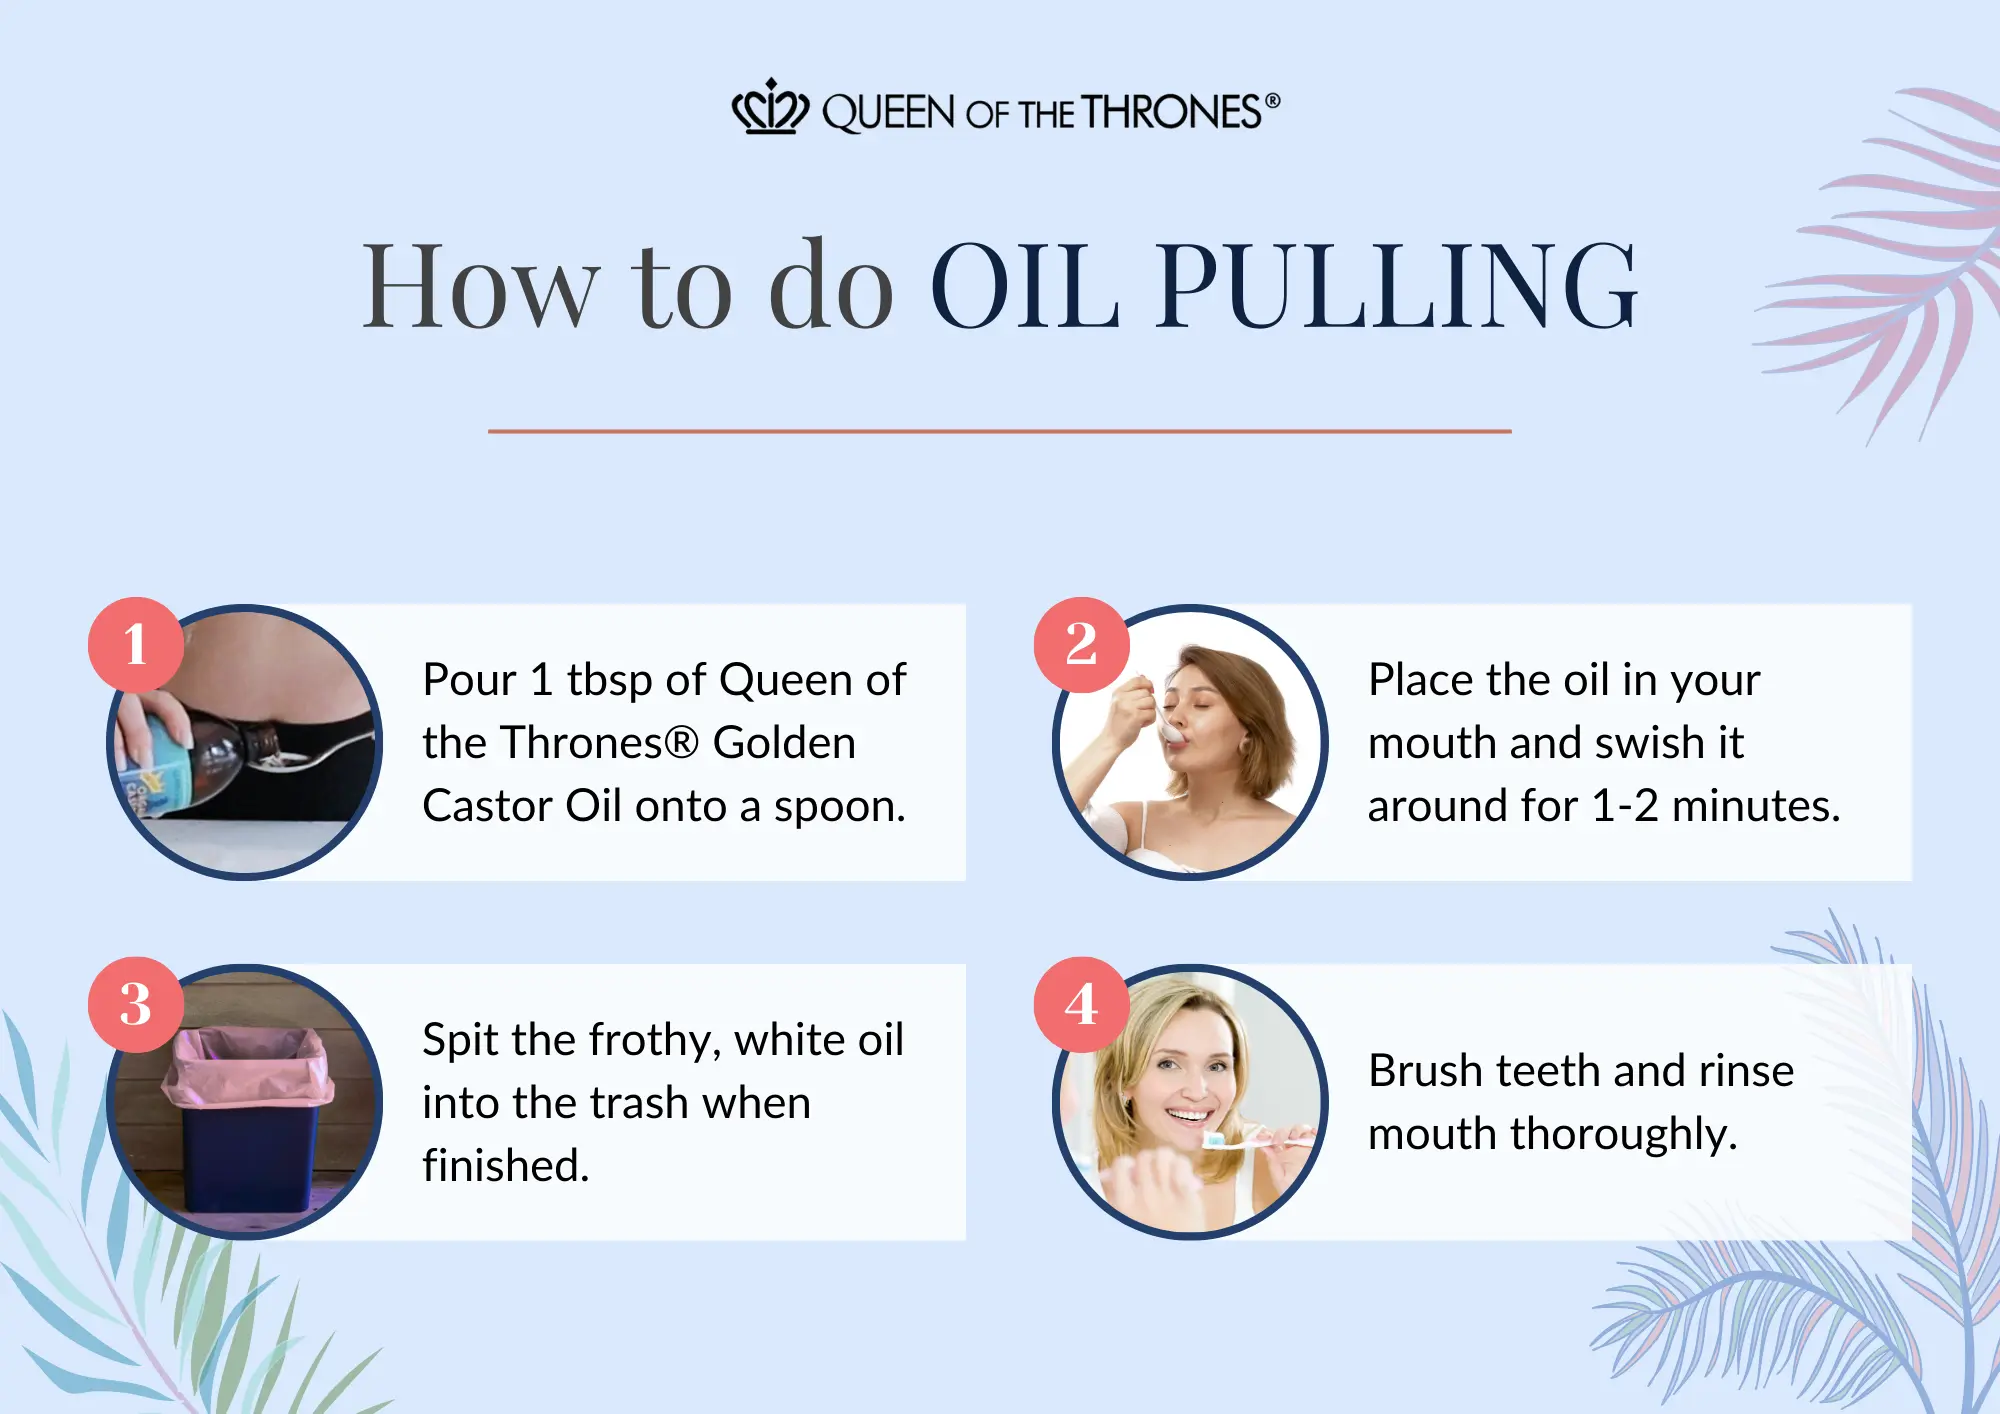 How to do oil pulling with Queen of the Thrones Castor Oil 